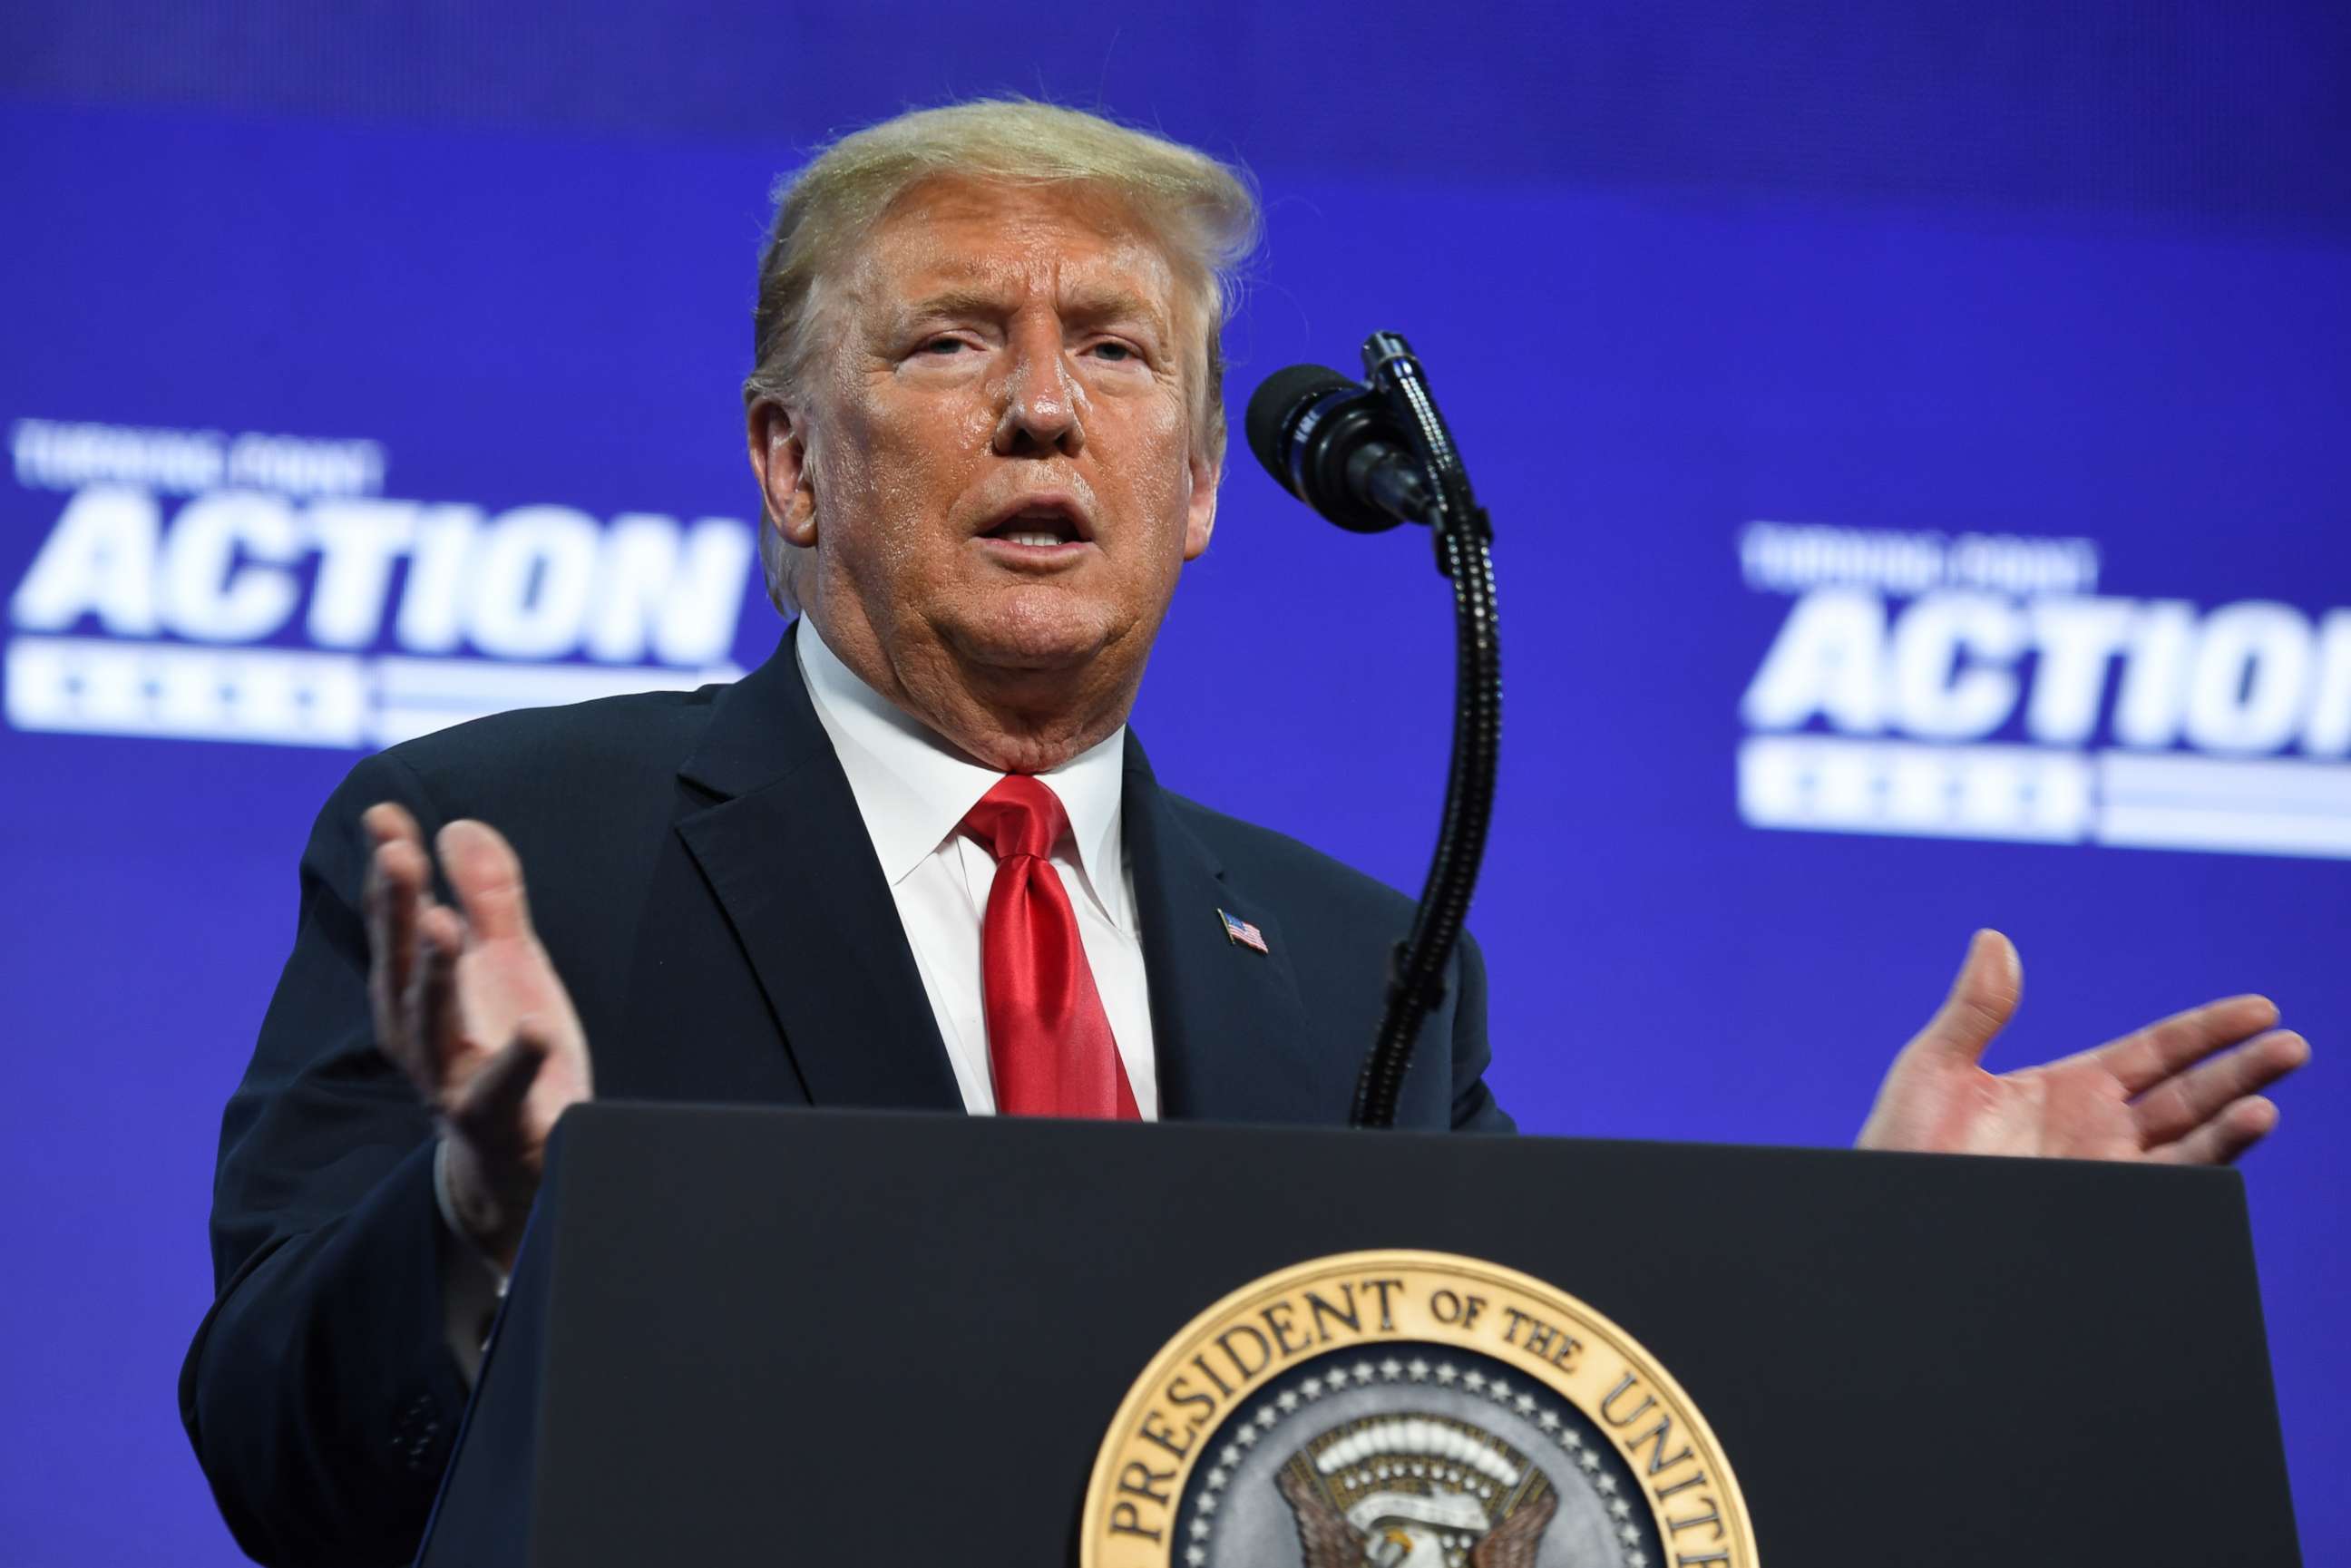 PHOTO: Donald Trump speaks during a Students for Trump event at the Dream City Church in Phoenix, Arizona, June 23, 2020.